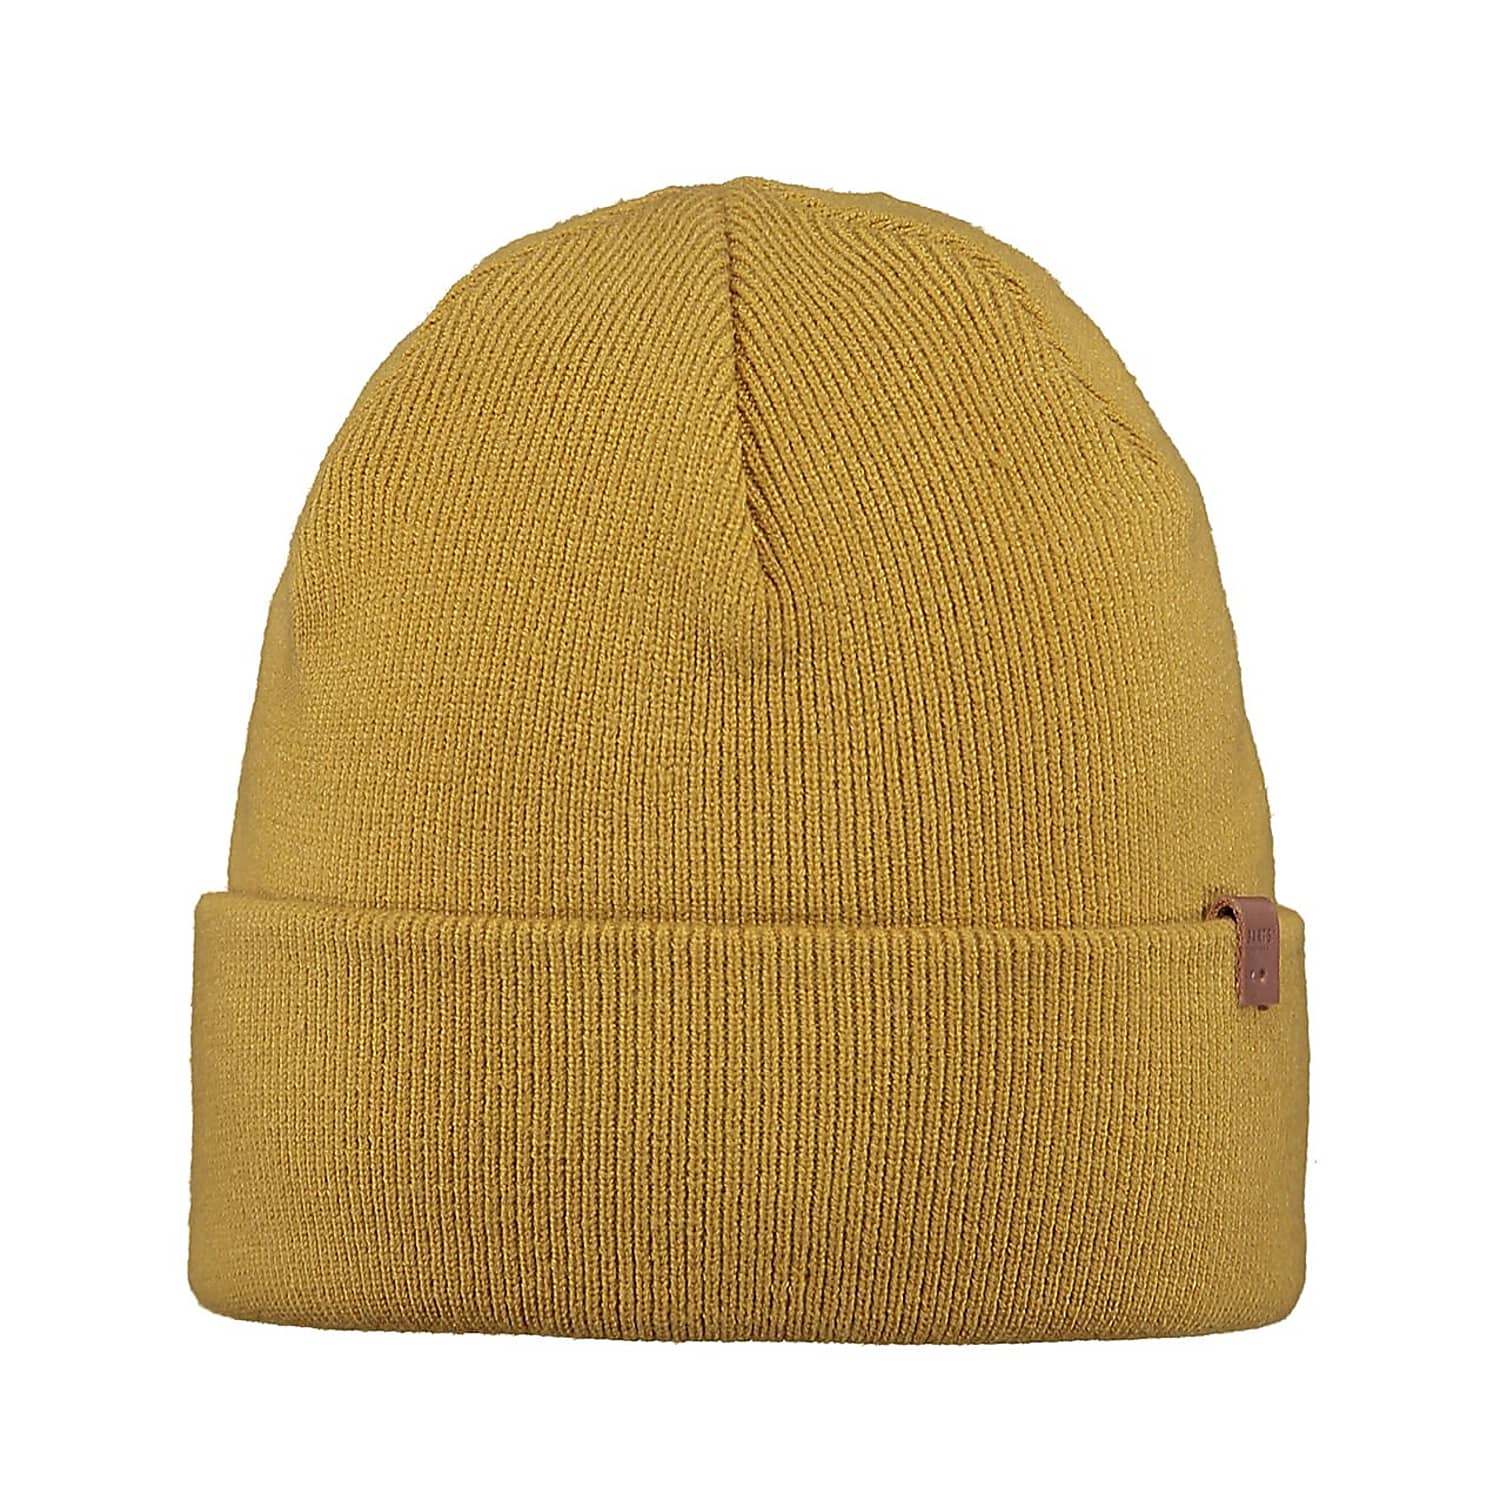 M cheap Yellow Barts - and Fast shipping BEANIE, WILLES